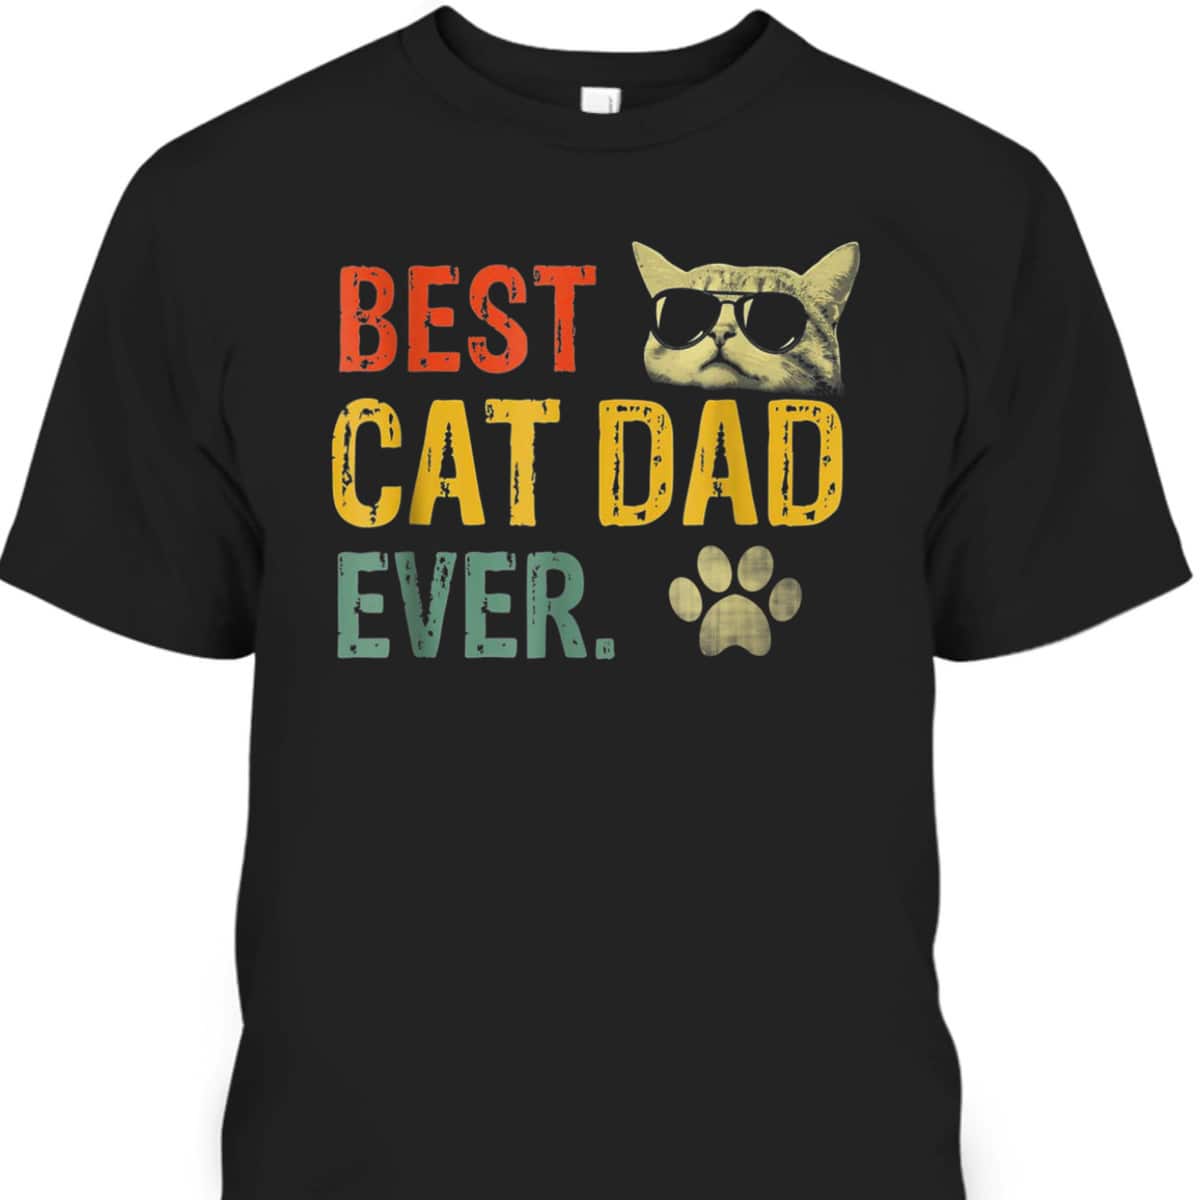 Vintage Father's Day T-Shirt Best Cat Dad Ever